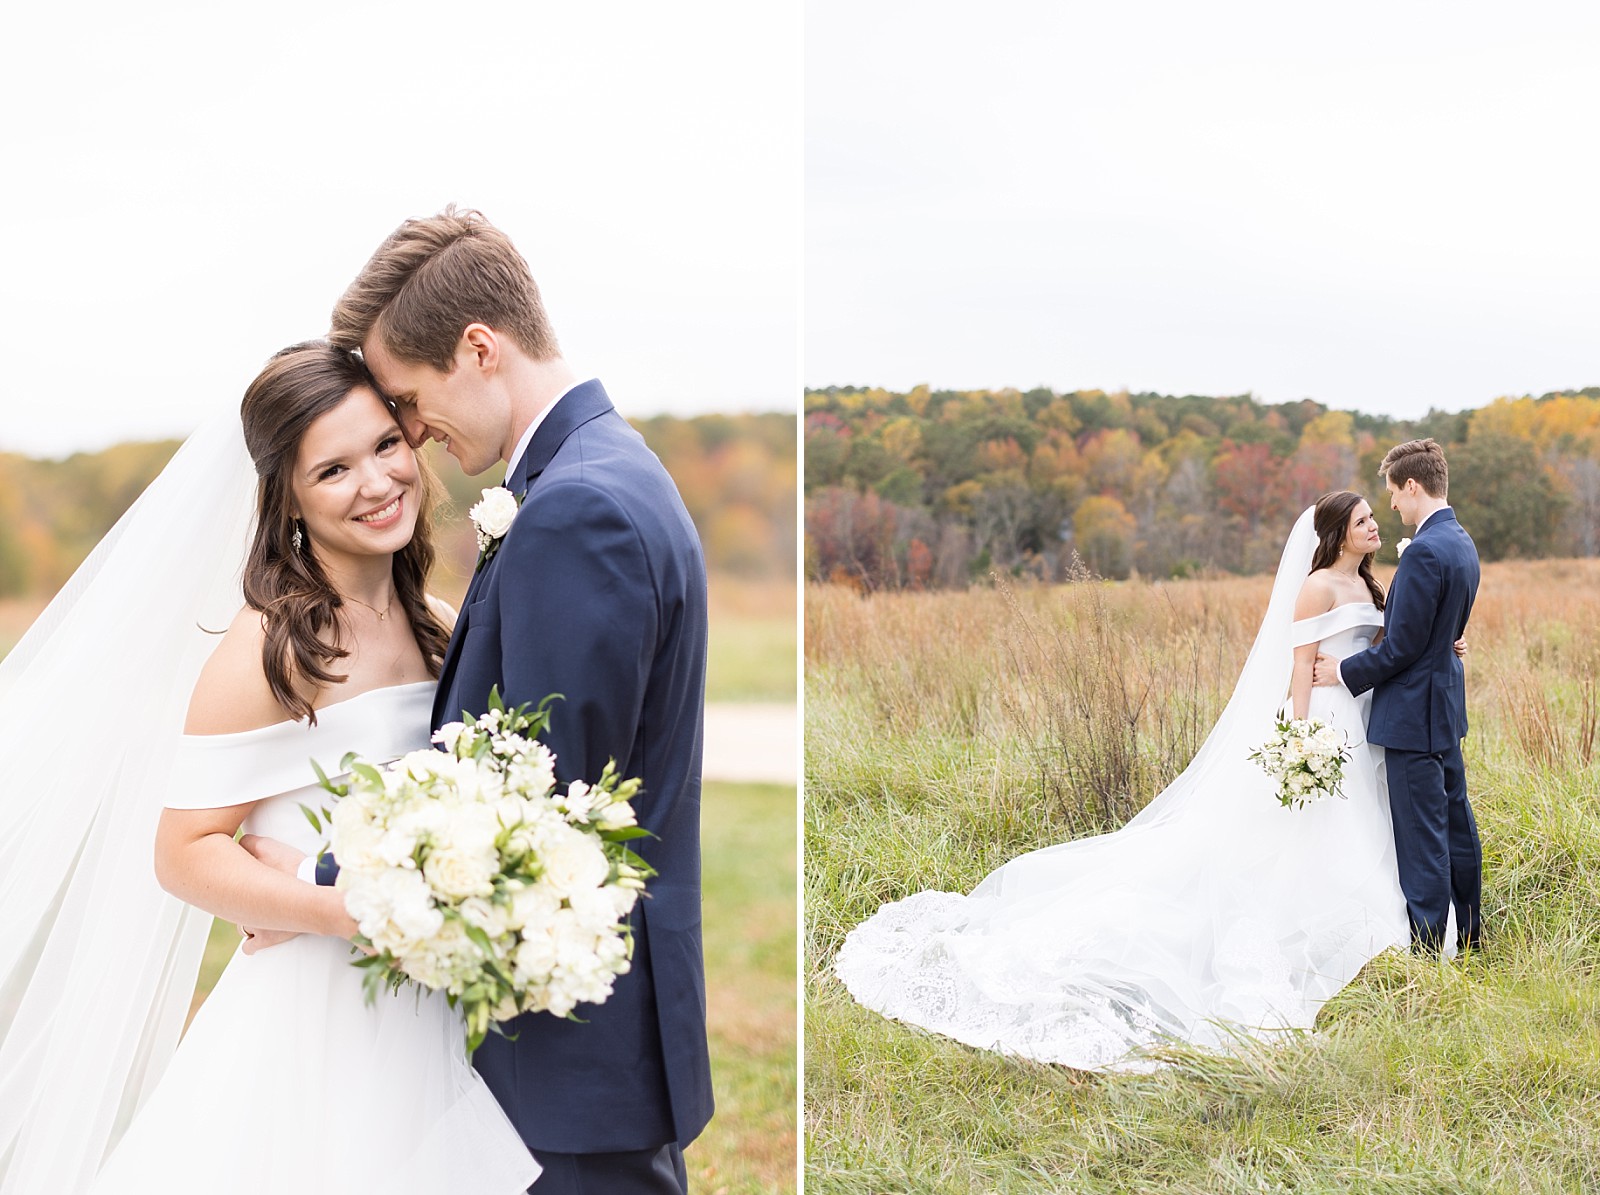 Meadow inspiration photos | Fall Wedding at The Meadows in Raleigh | Raleigh NC Wedding Photographer